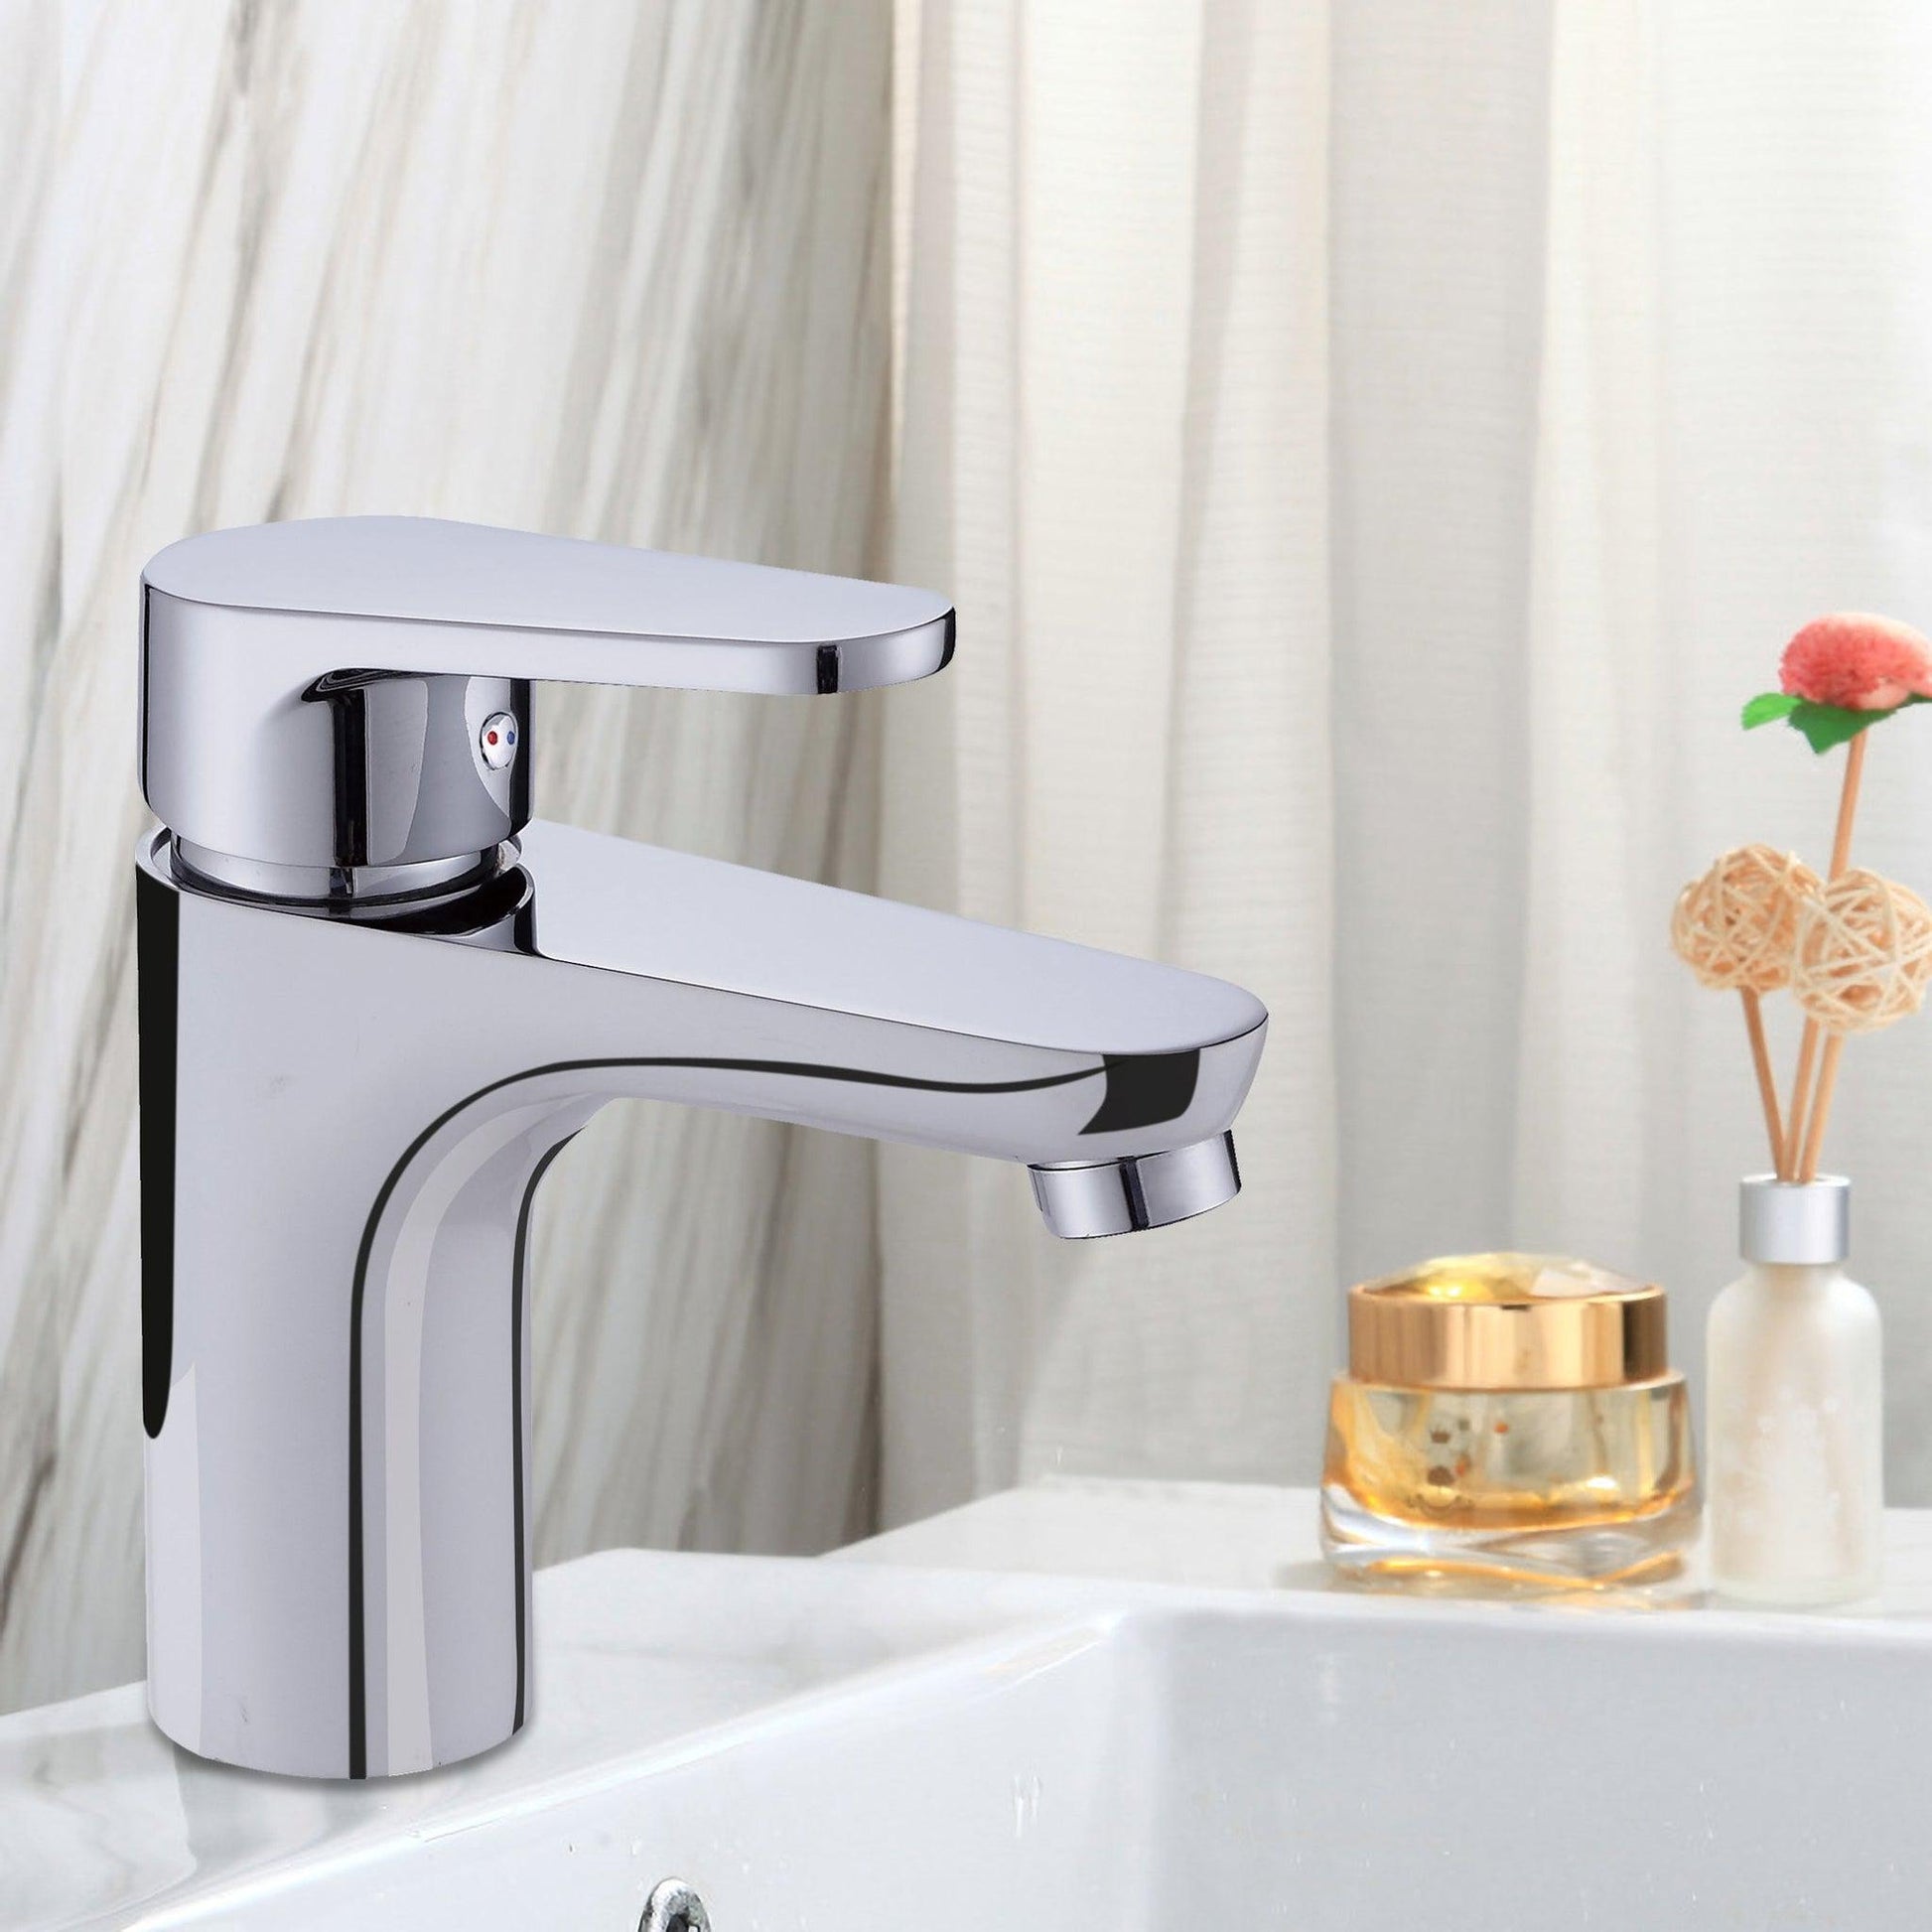 Vanity Art 6" Polished Chrome Stainless Steel Deck Mount Vanity Bathroom Vessel Faucet With Single Lever Handle